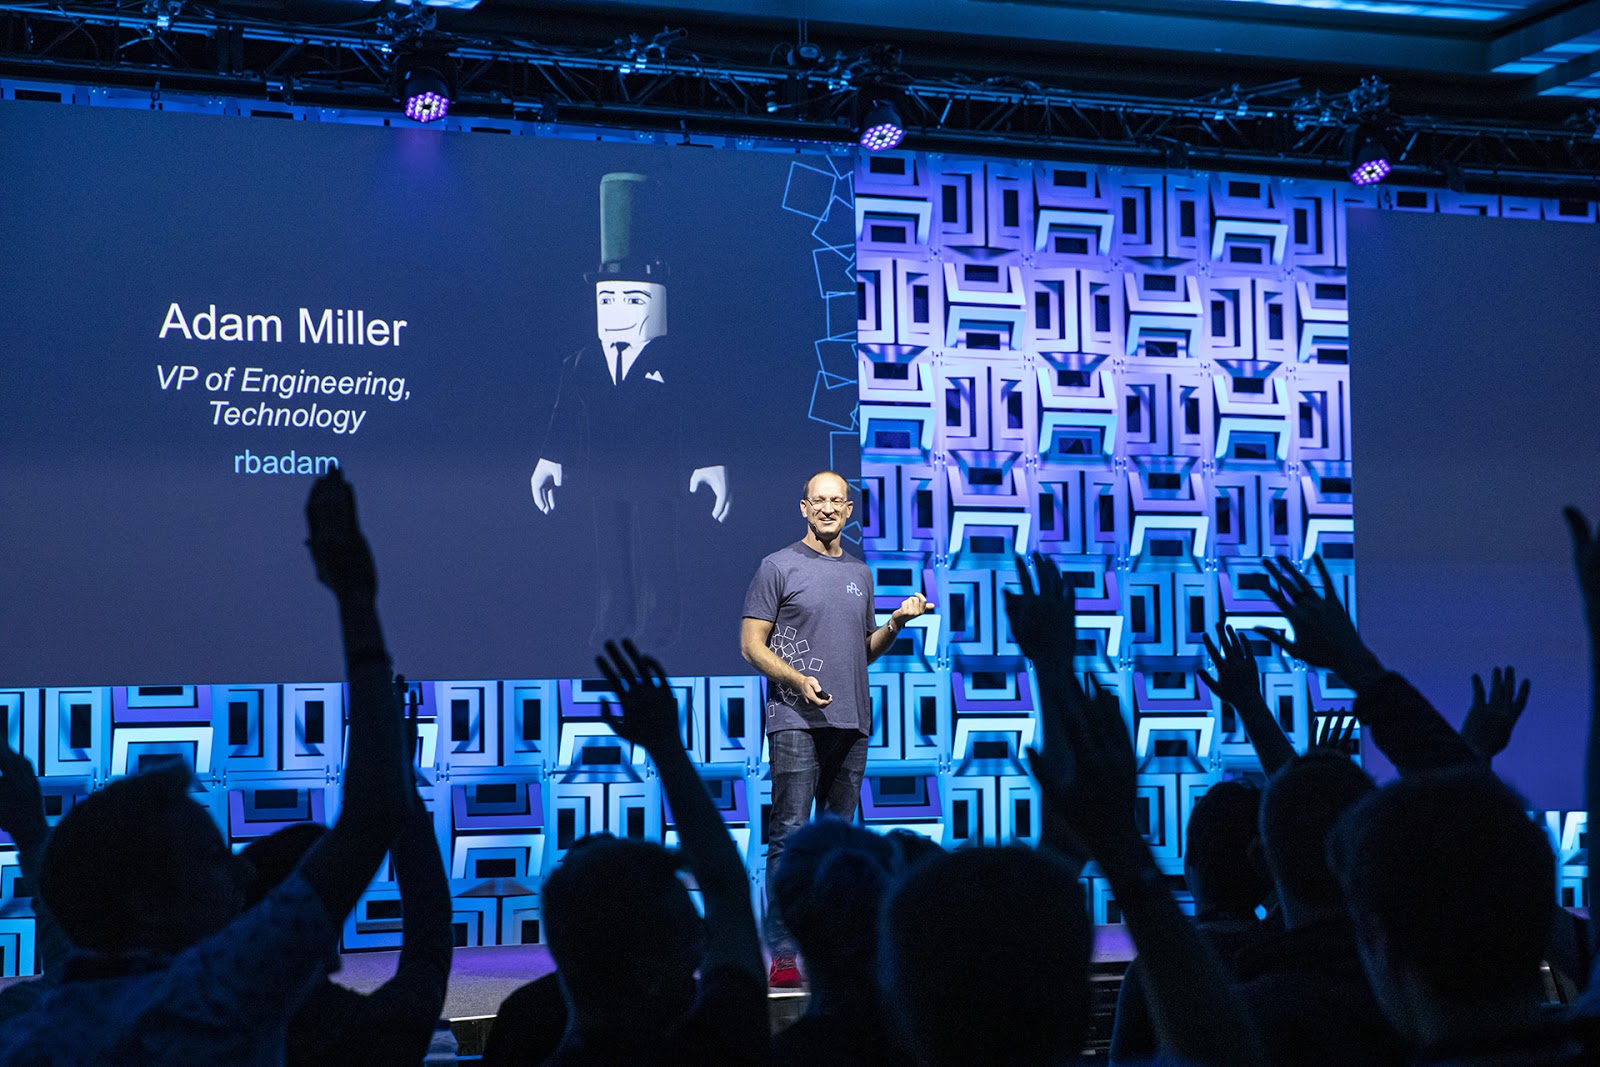 Minecraft and Roblox Took Center Stage at VidCon Creator Conference